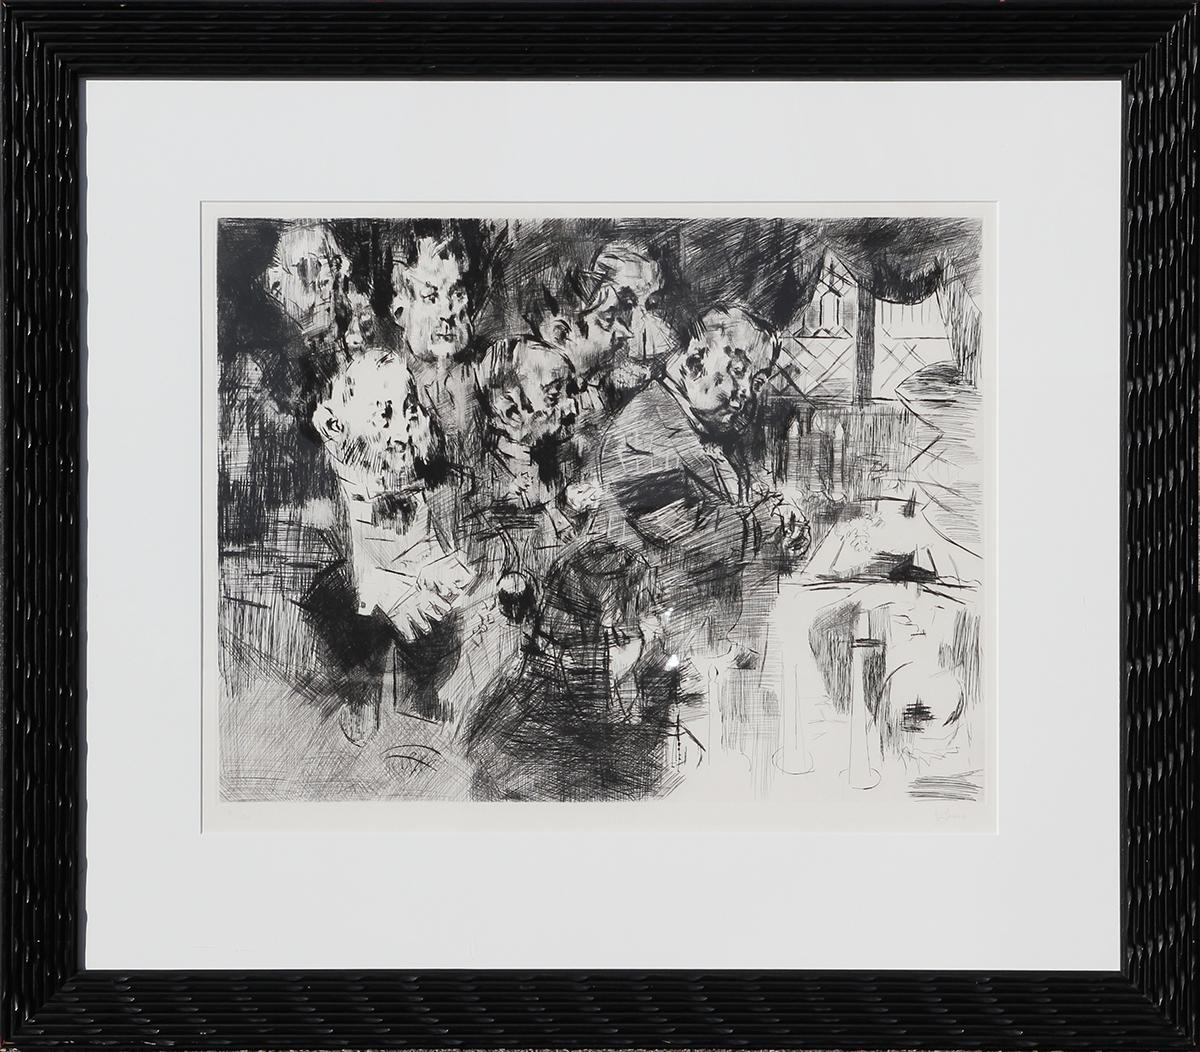 Jack Levine Figurative Art - "Gangster's Funeral" Black and White Abstract Figurative Etching on Paper 